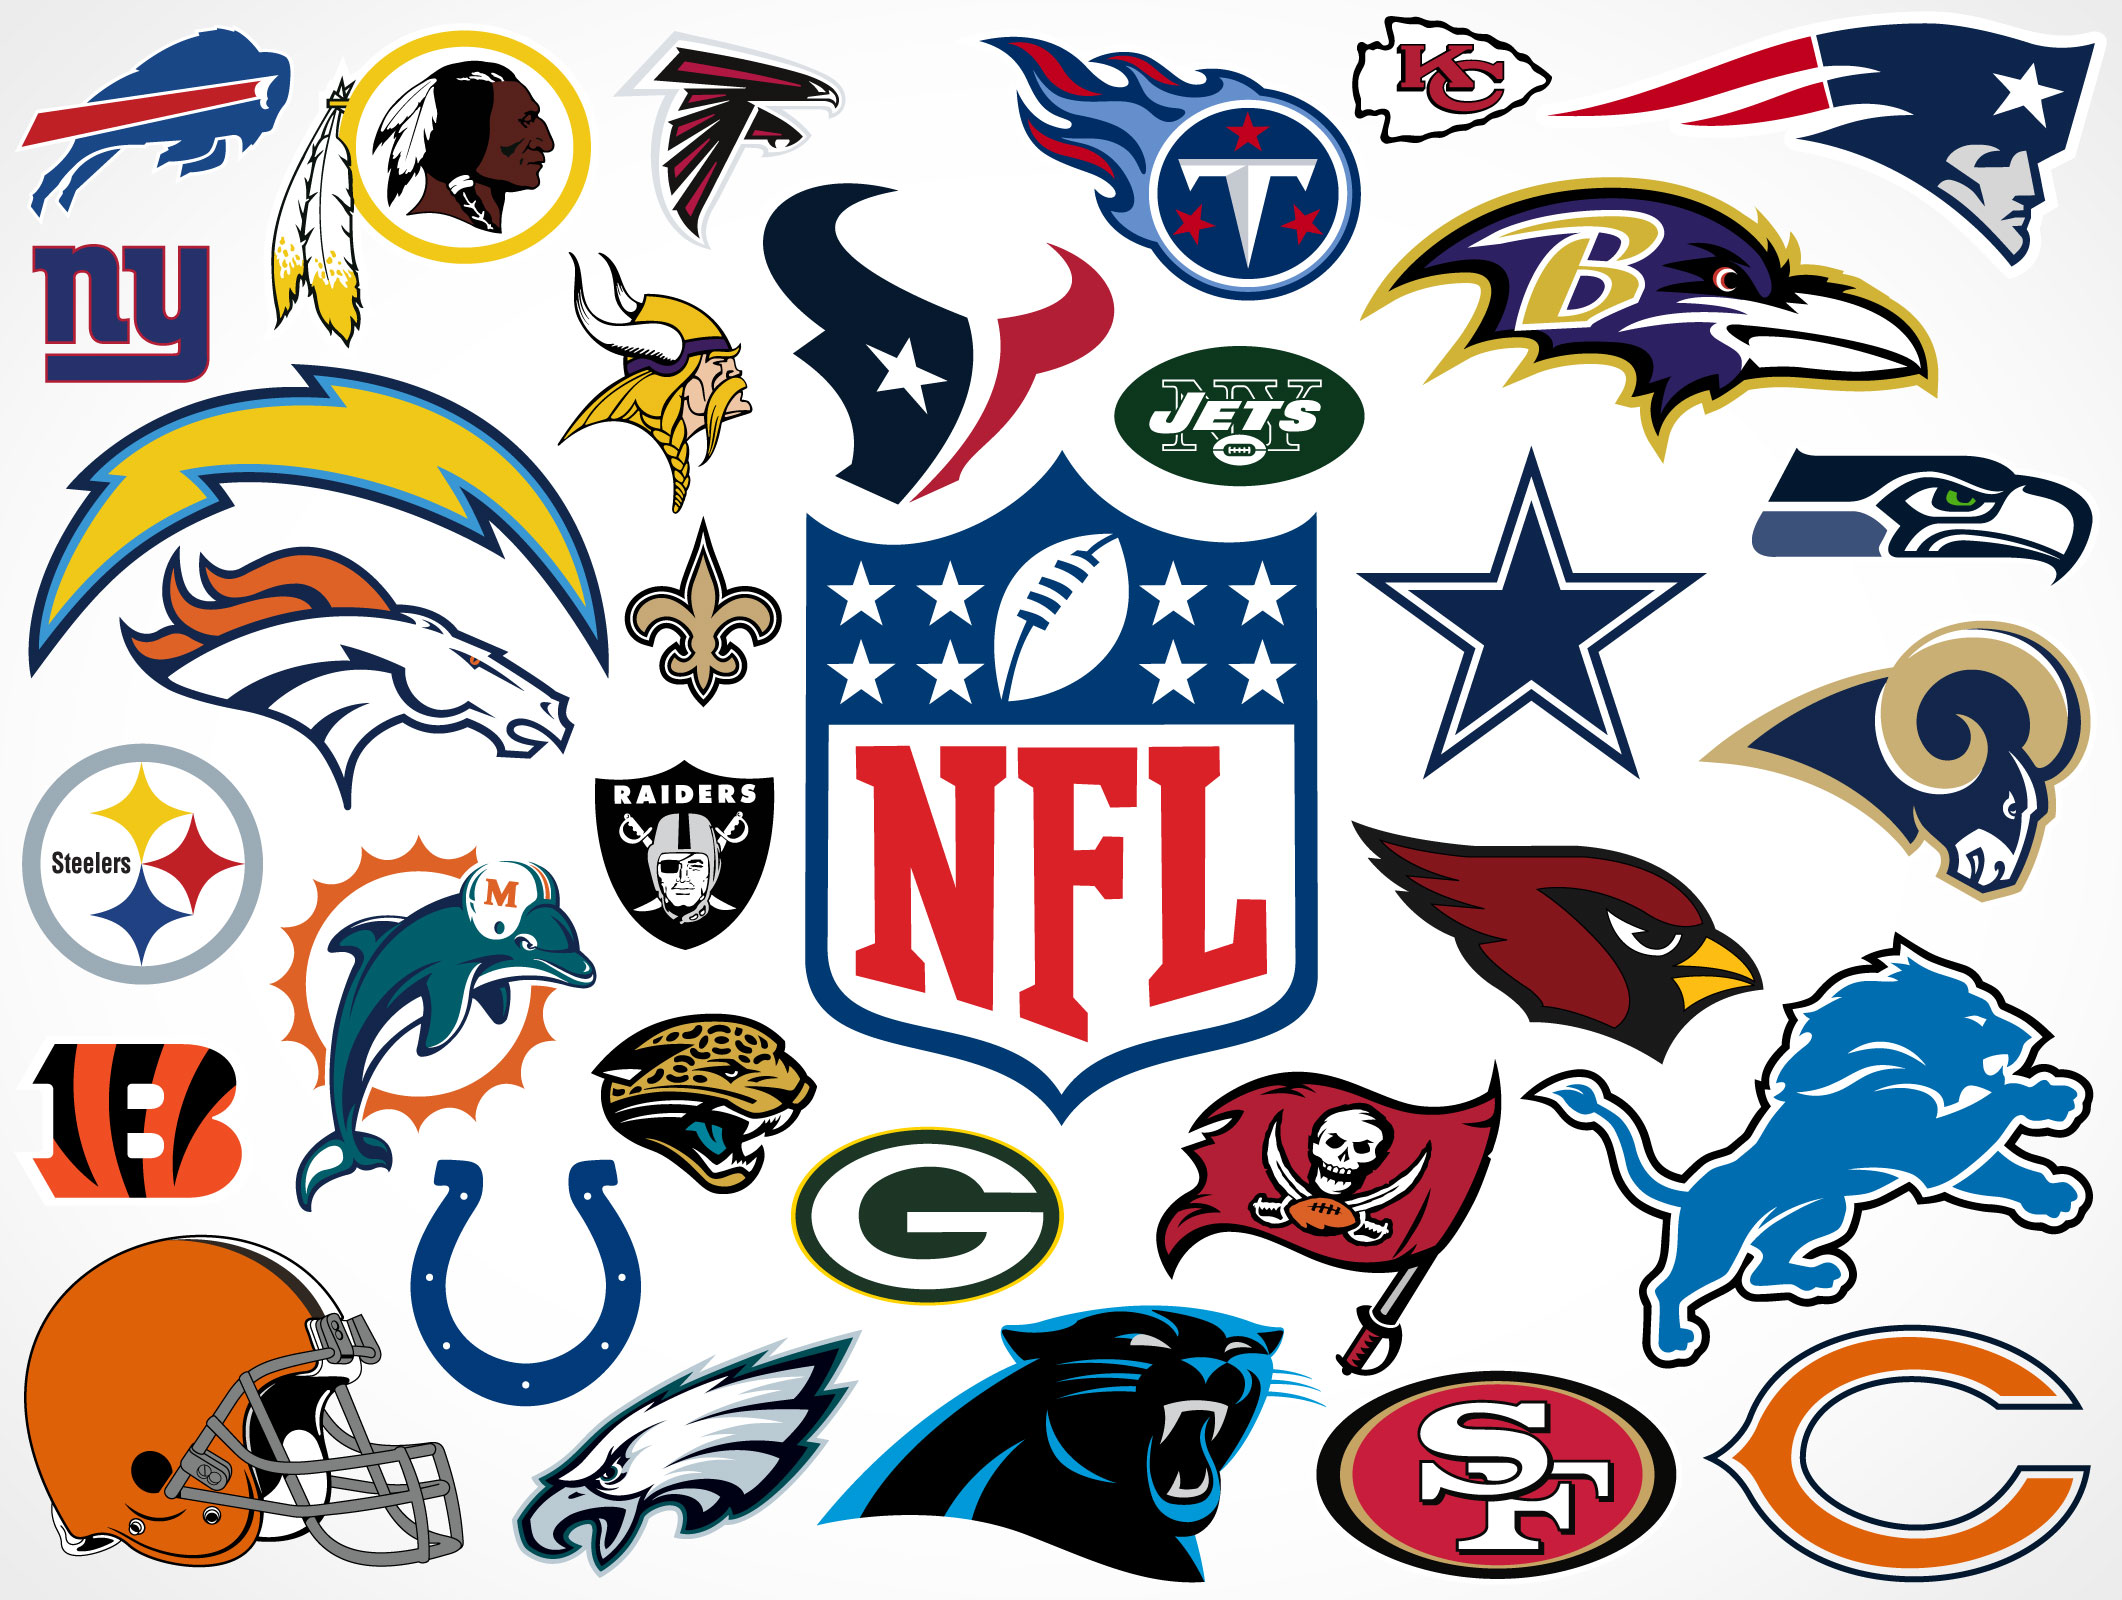 nfl leagues and teams